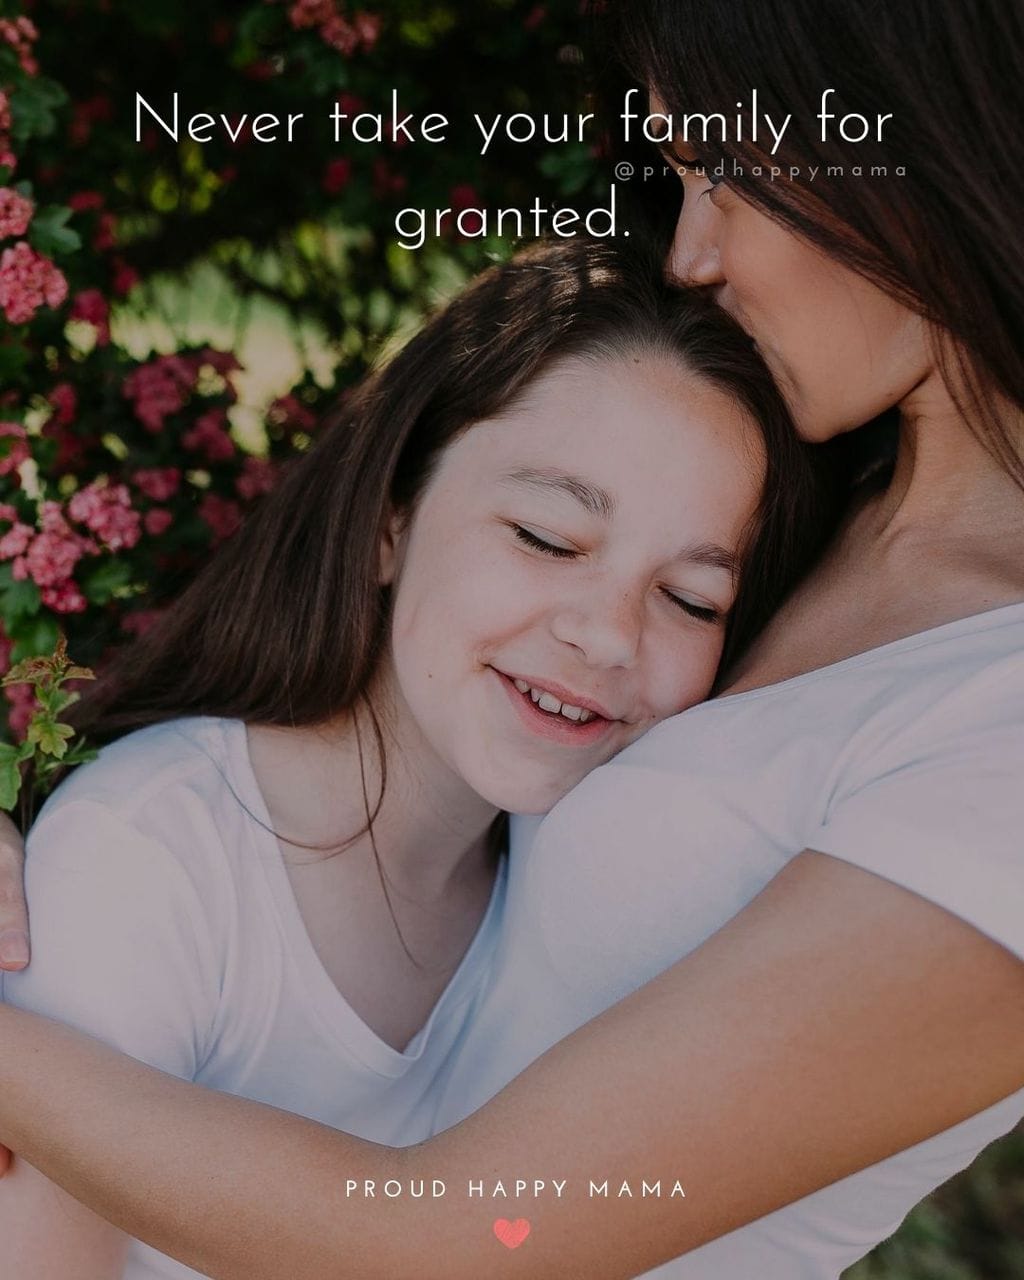 Quotes For Happy Family | Never take your family for granted.